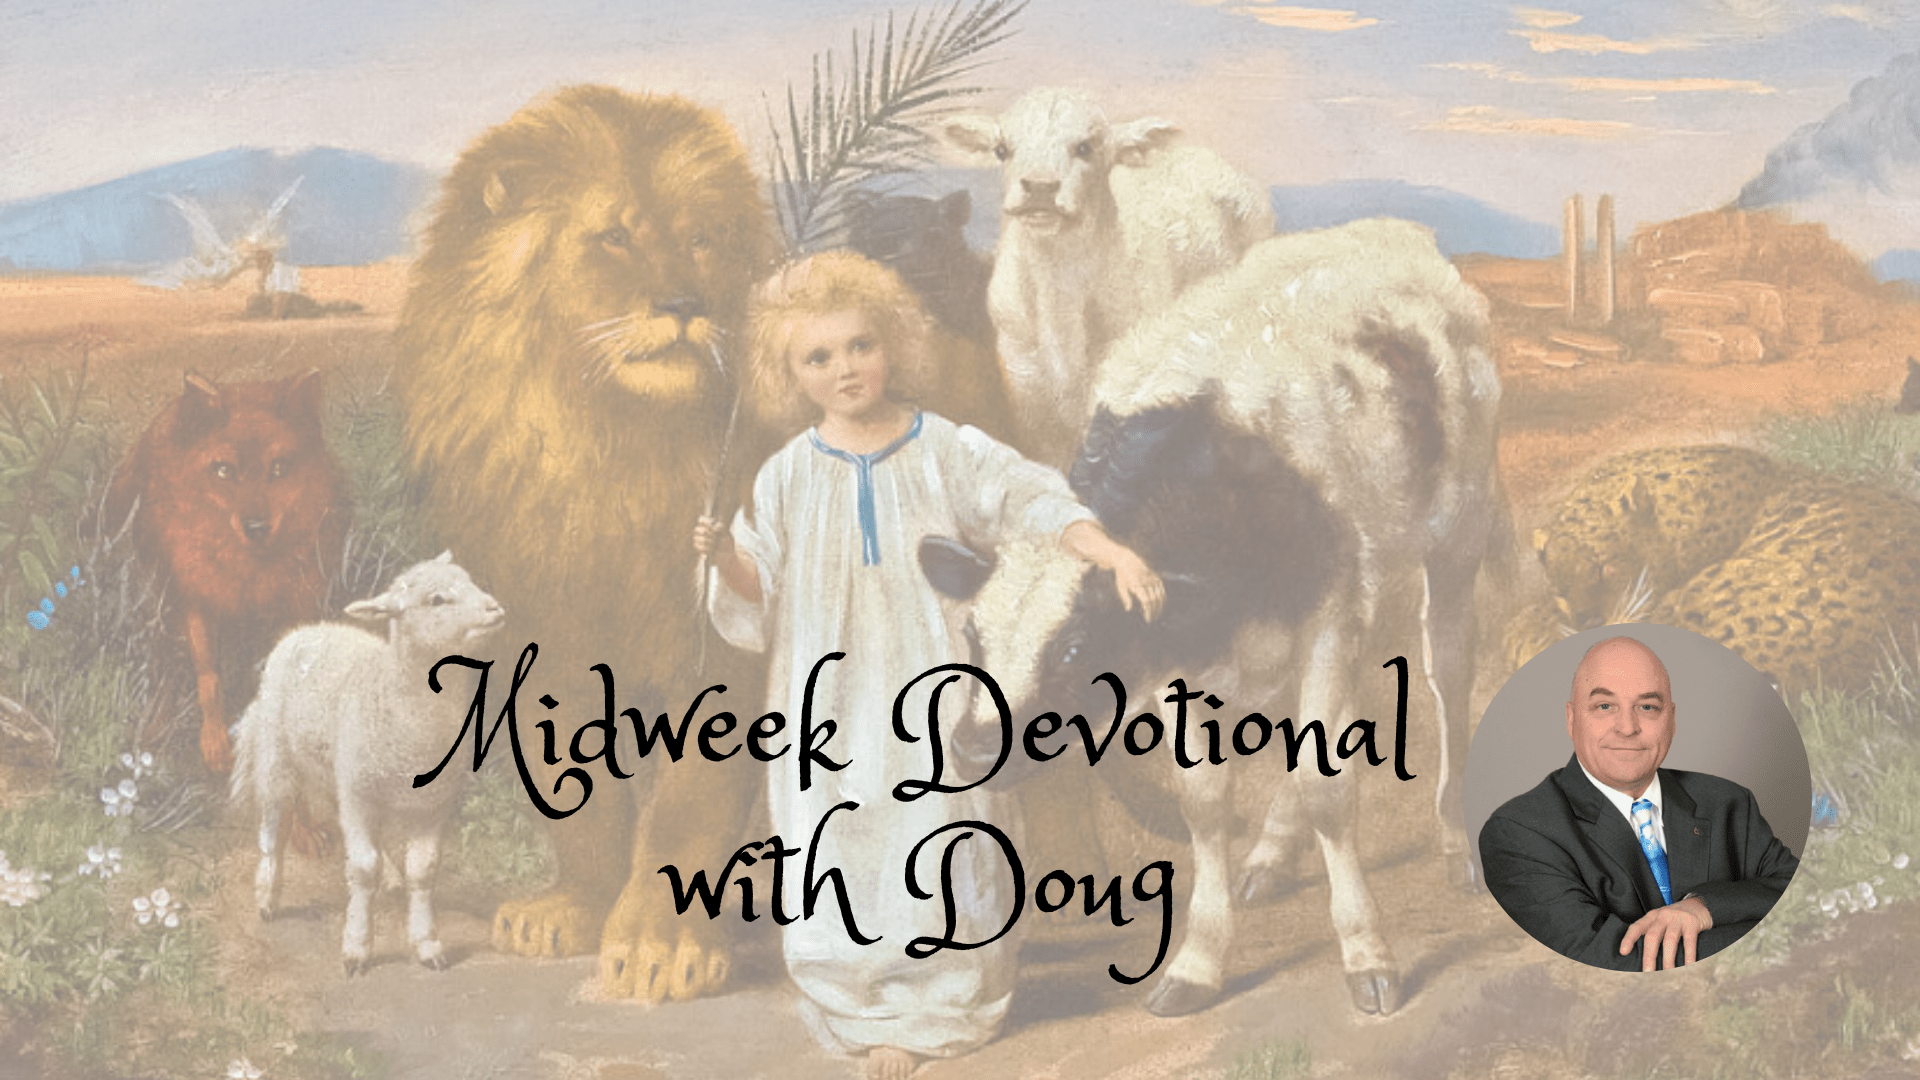 Midweek Devotional with Doug for second week of July